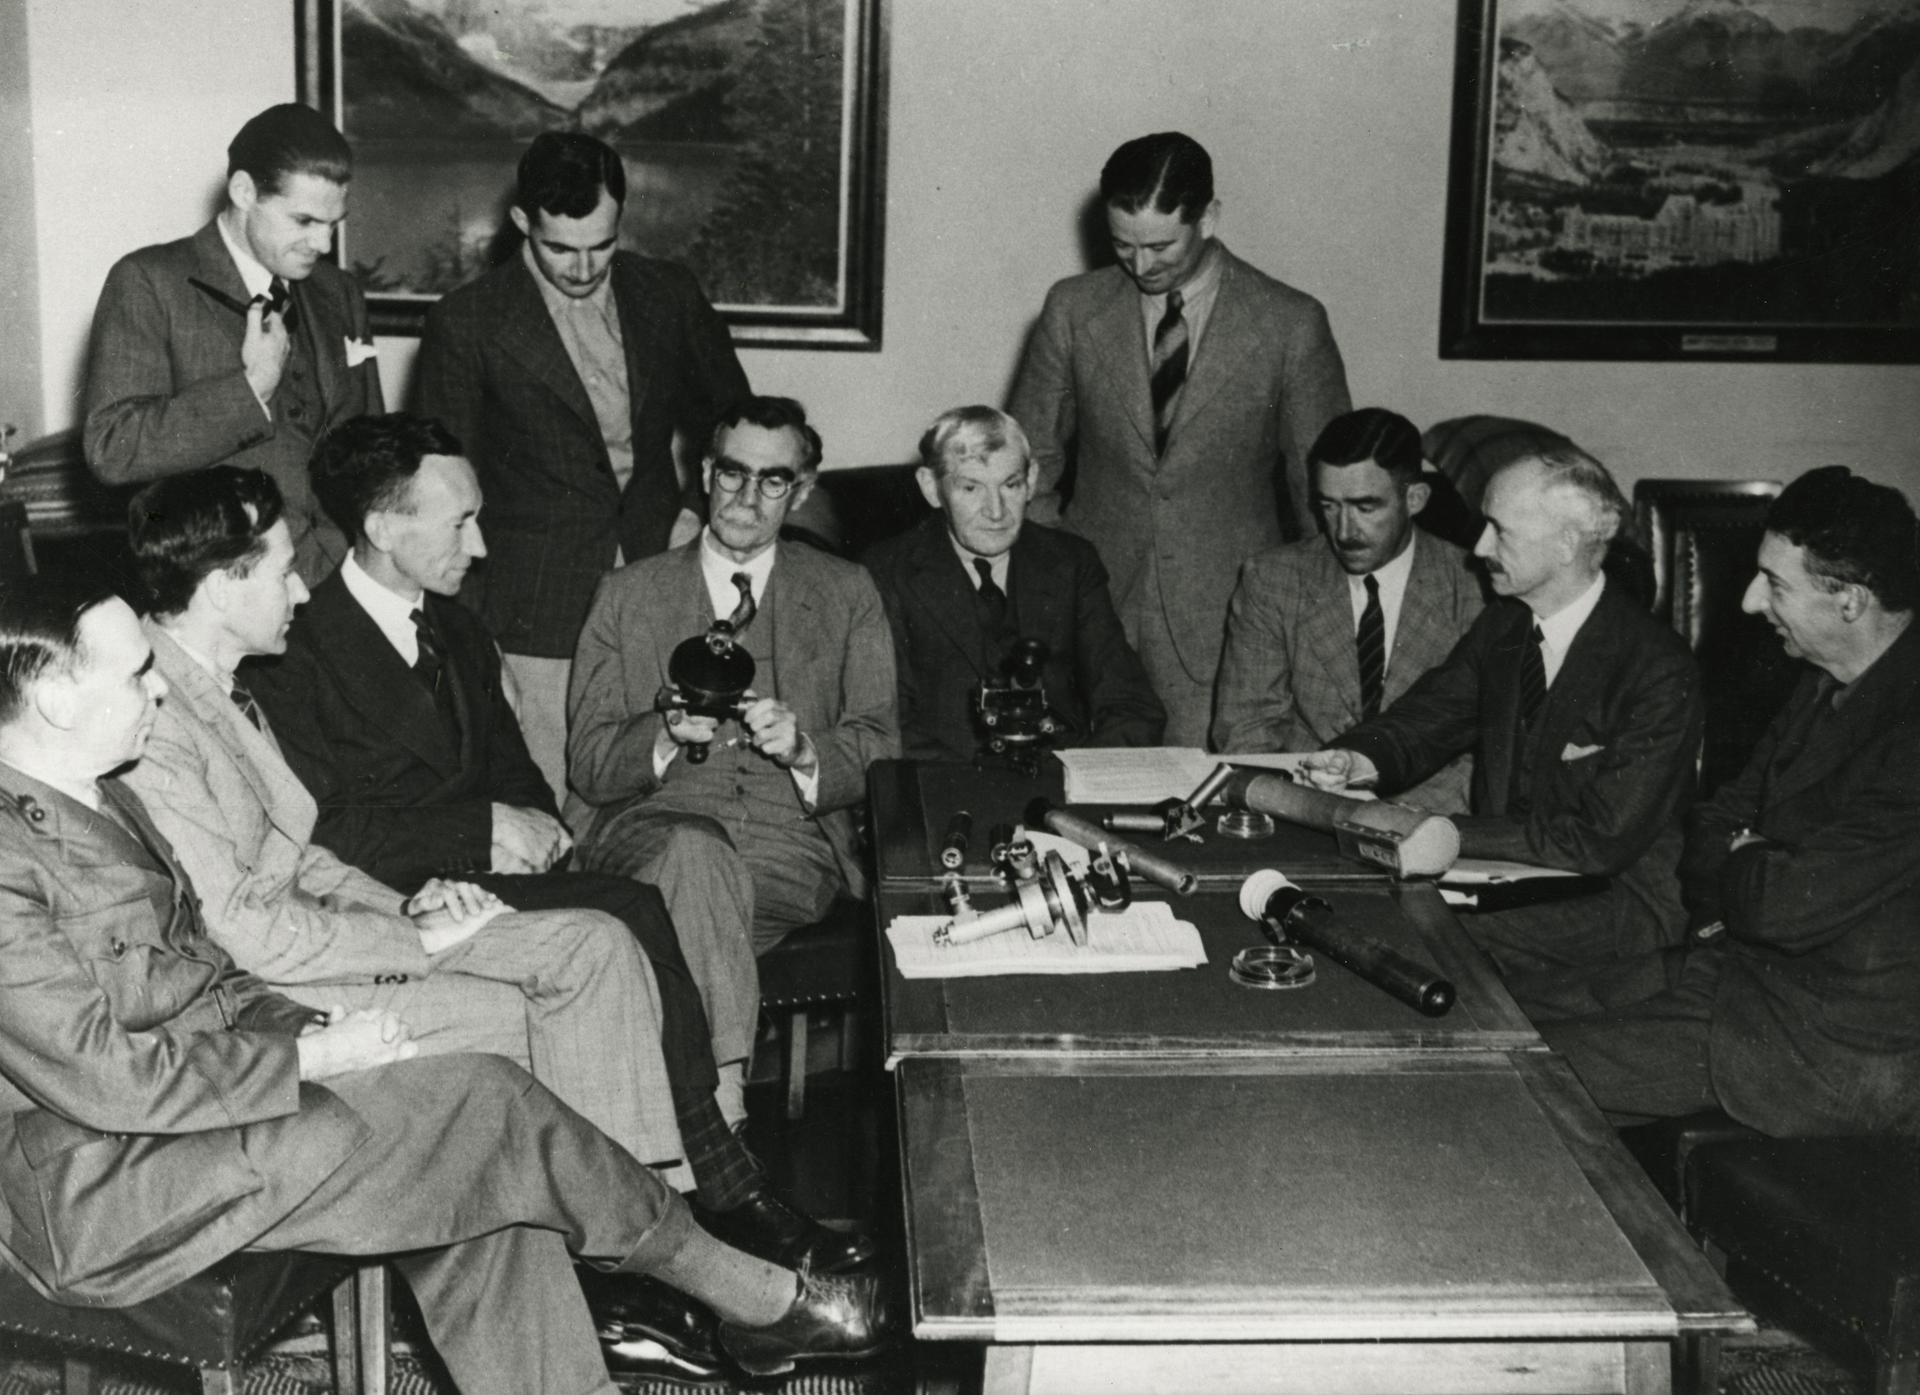 Dr J.S. Rogers (3rd from right), member of the Optical Munitions Panel